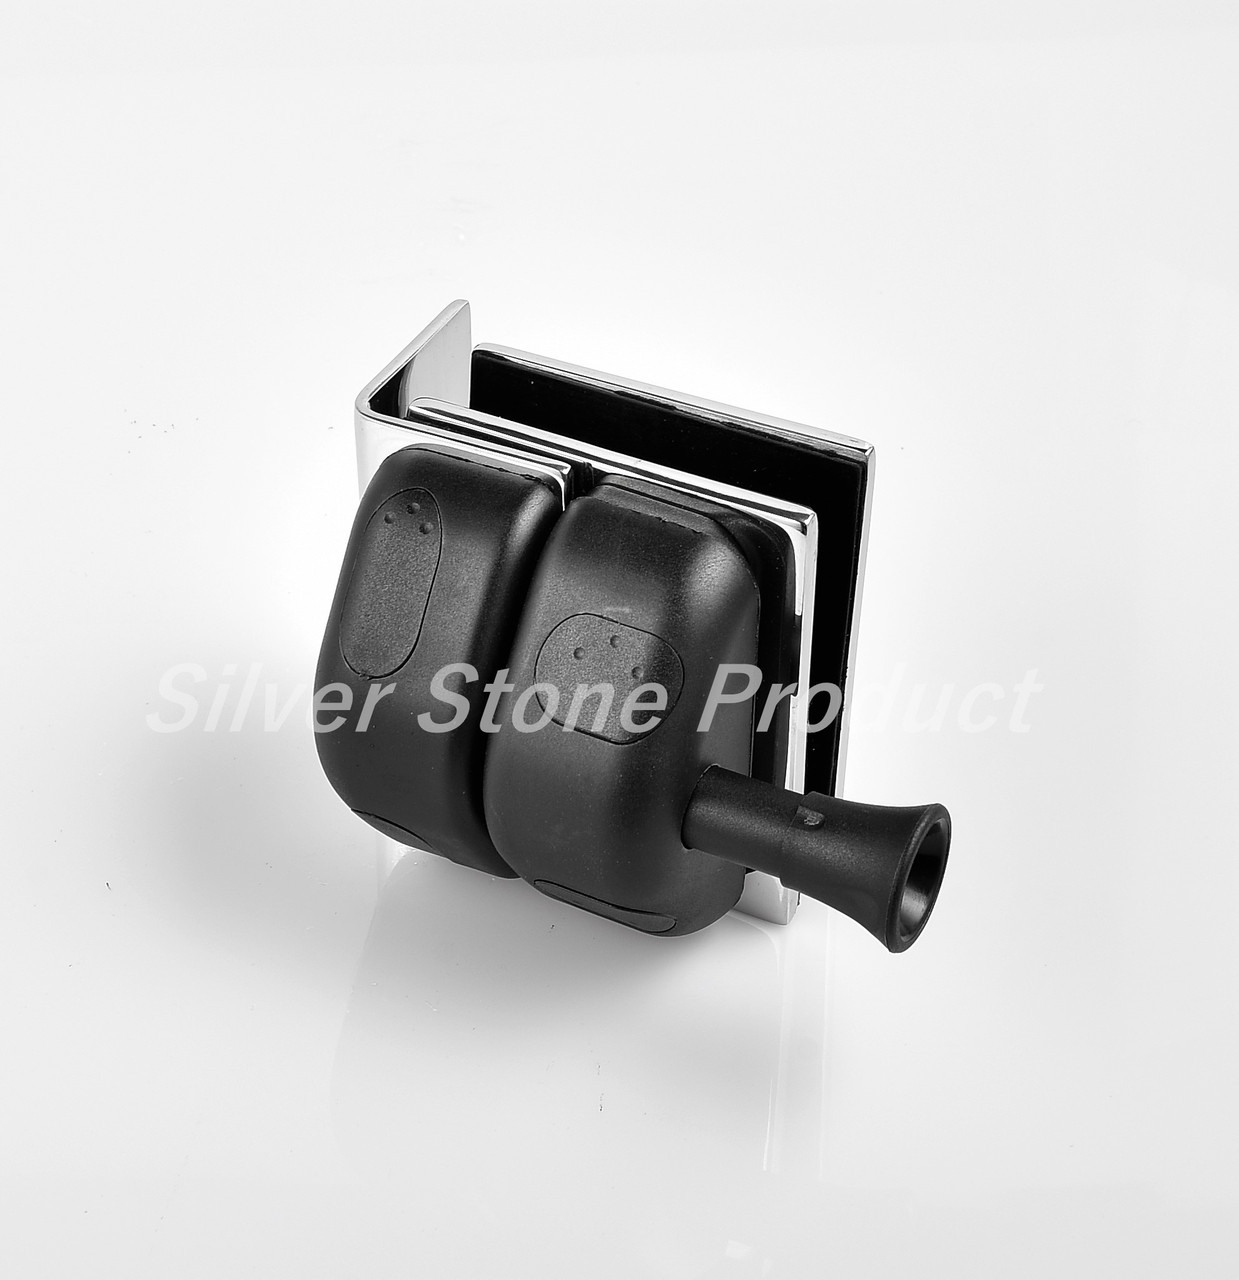 Glass to square post / wall magnet latch - Silver Stone Hardware Pty Ltd